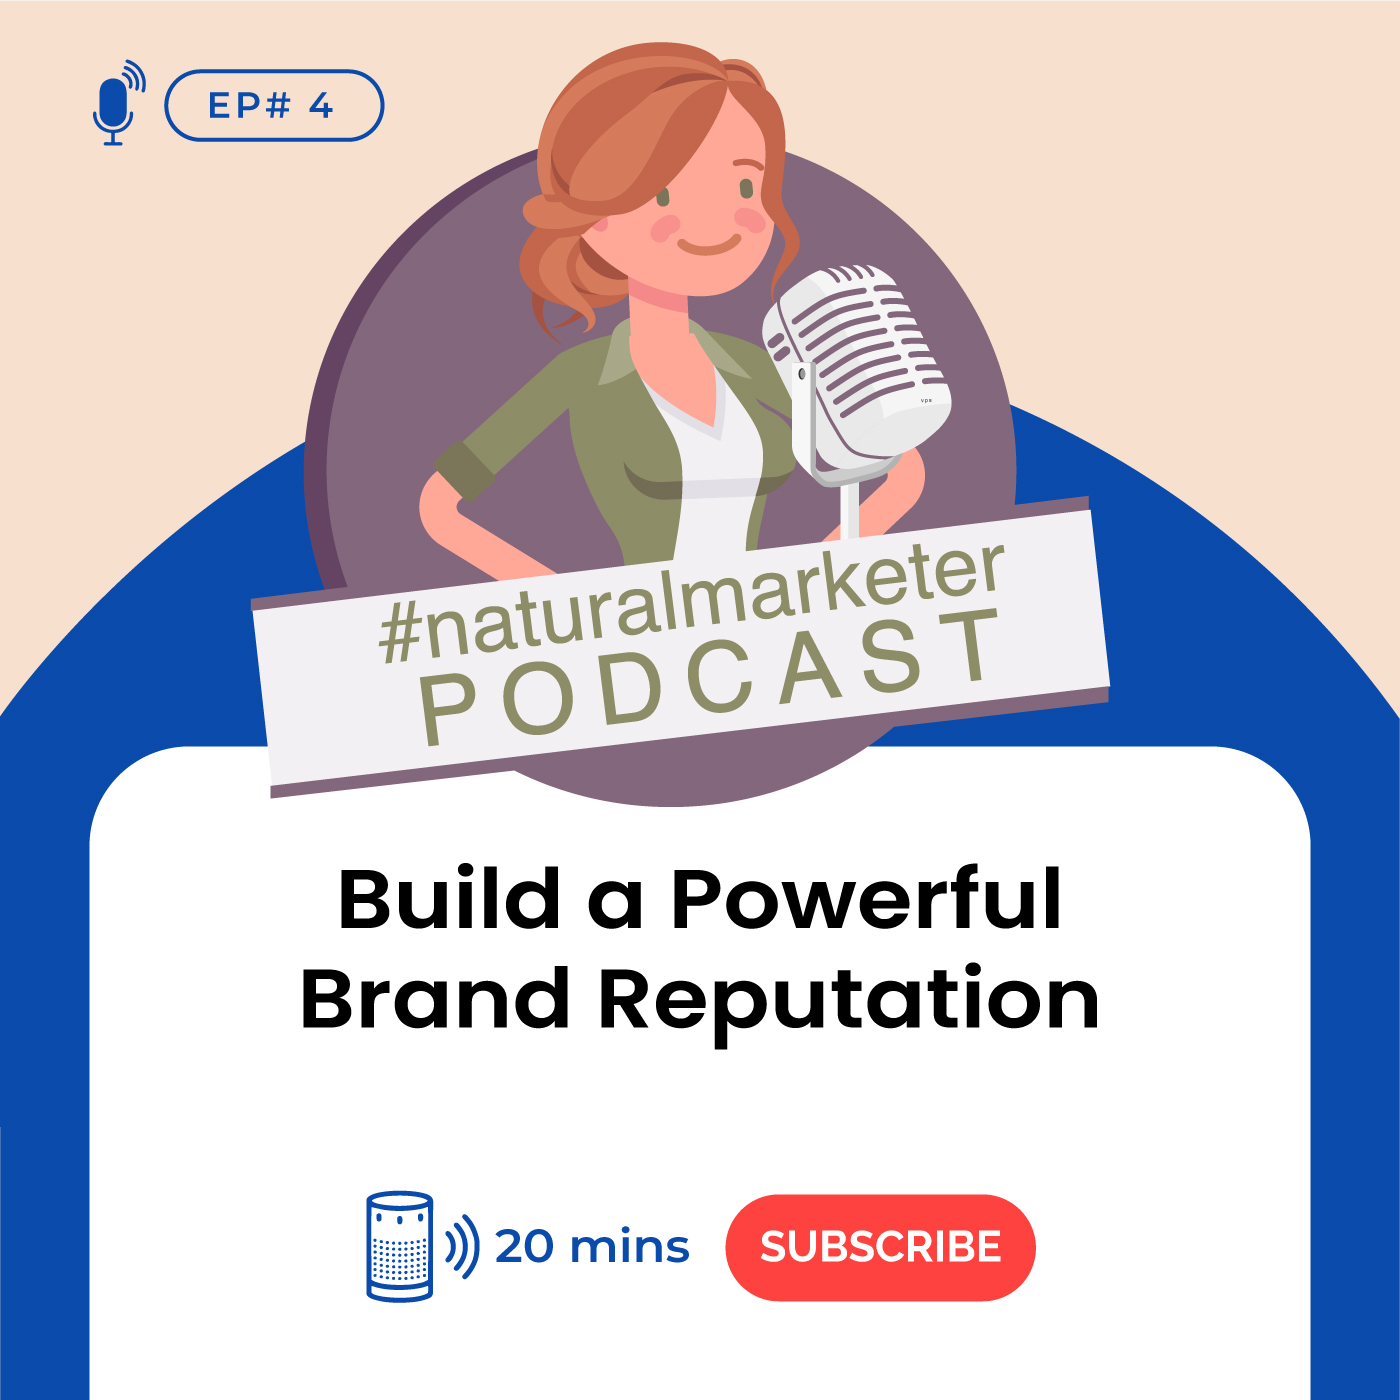 Episode 4: Build a Powerful Brand Reputation